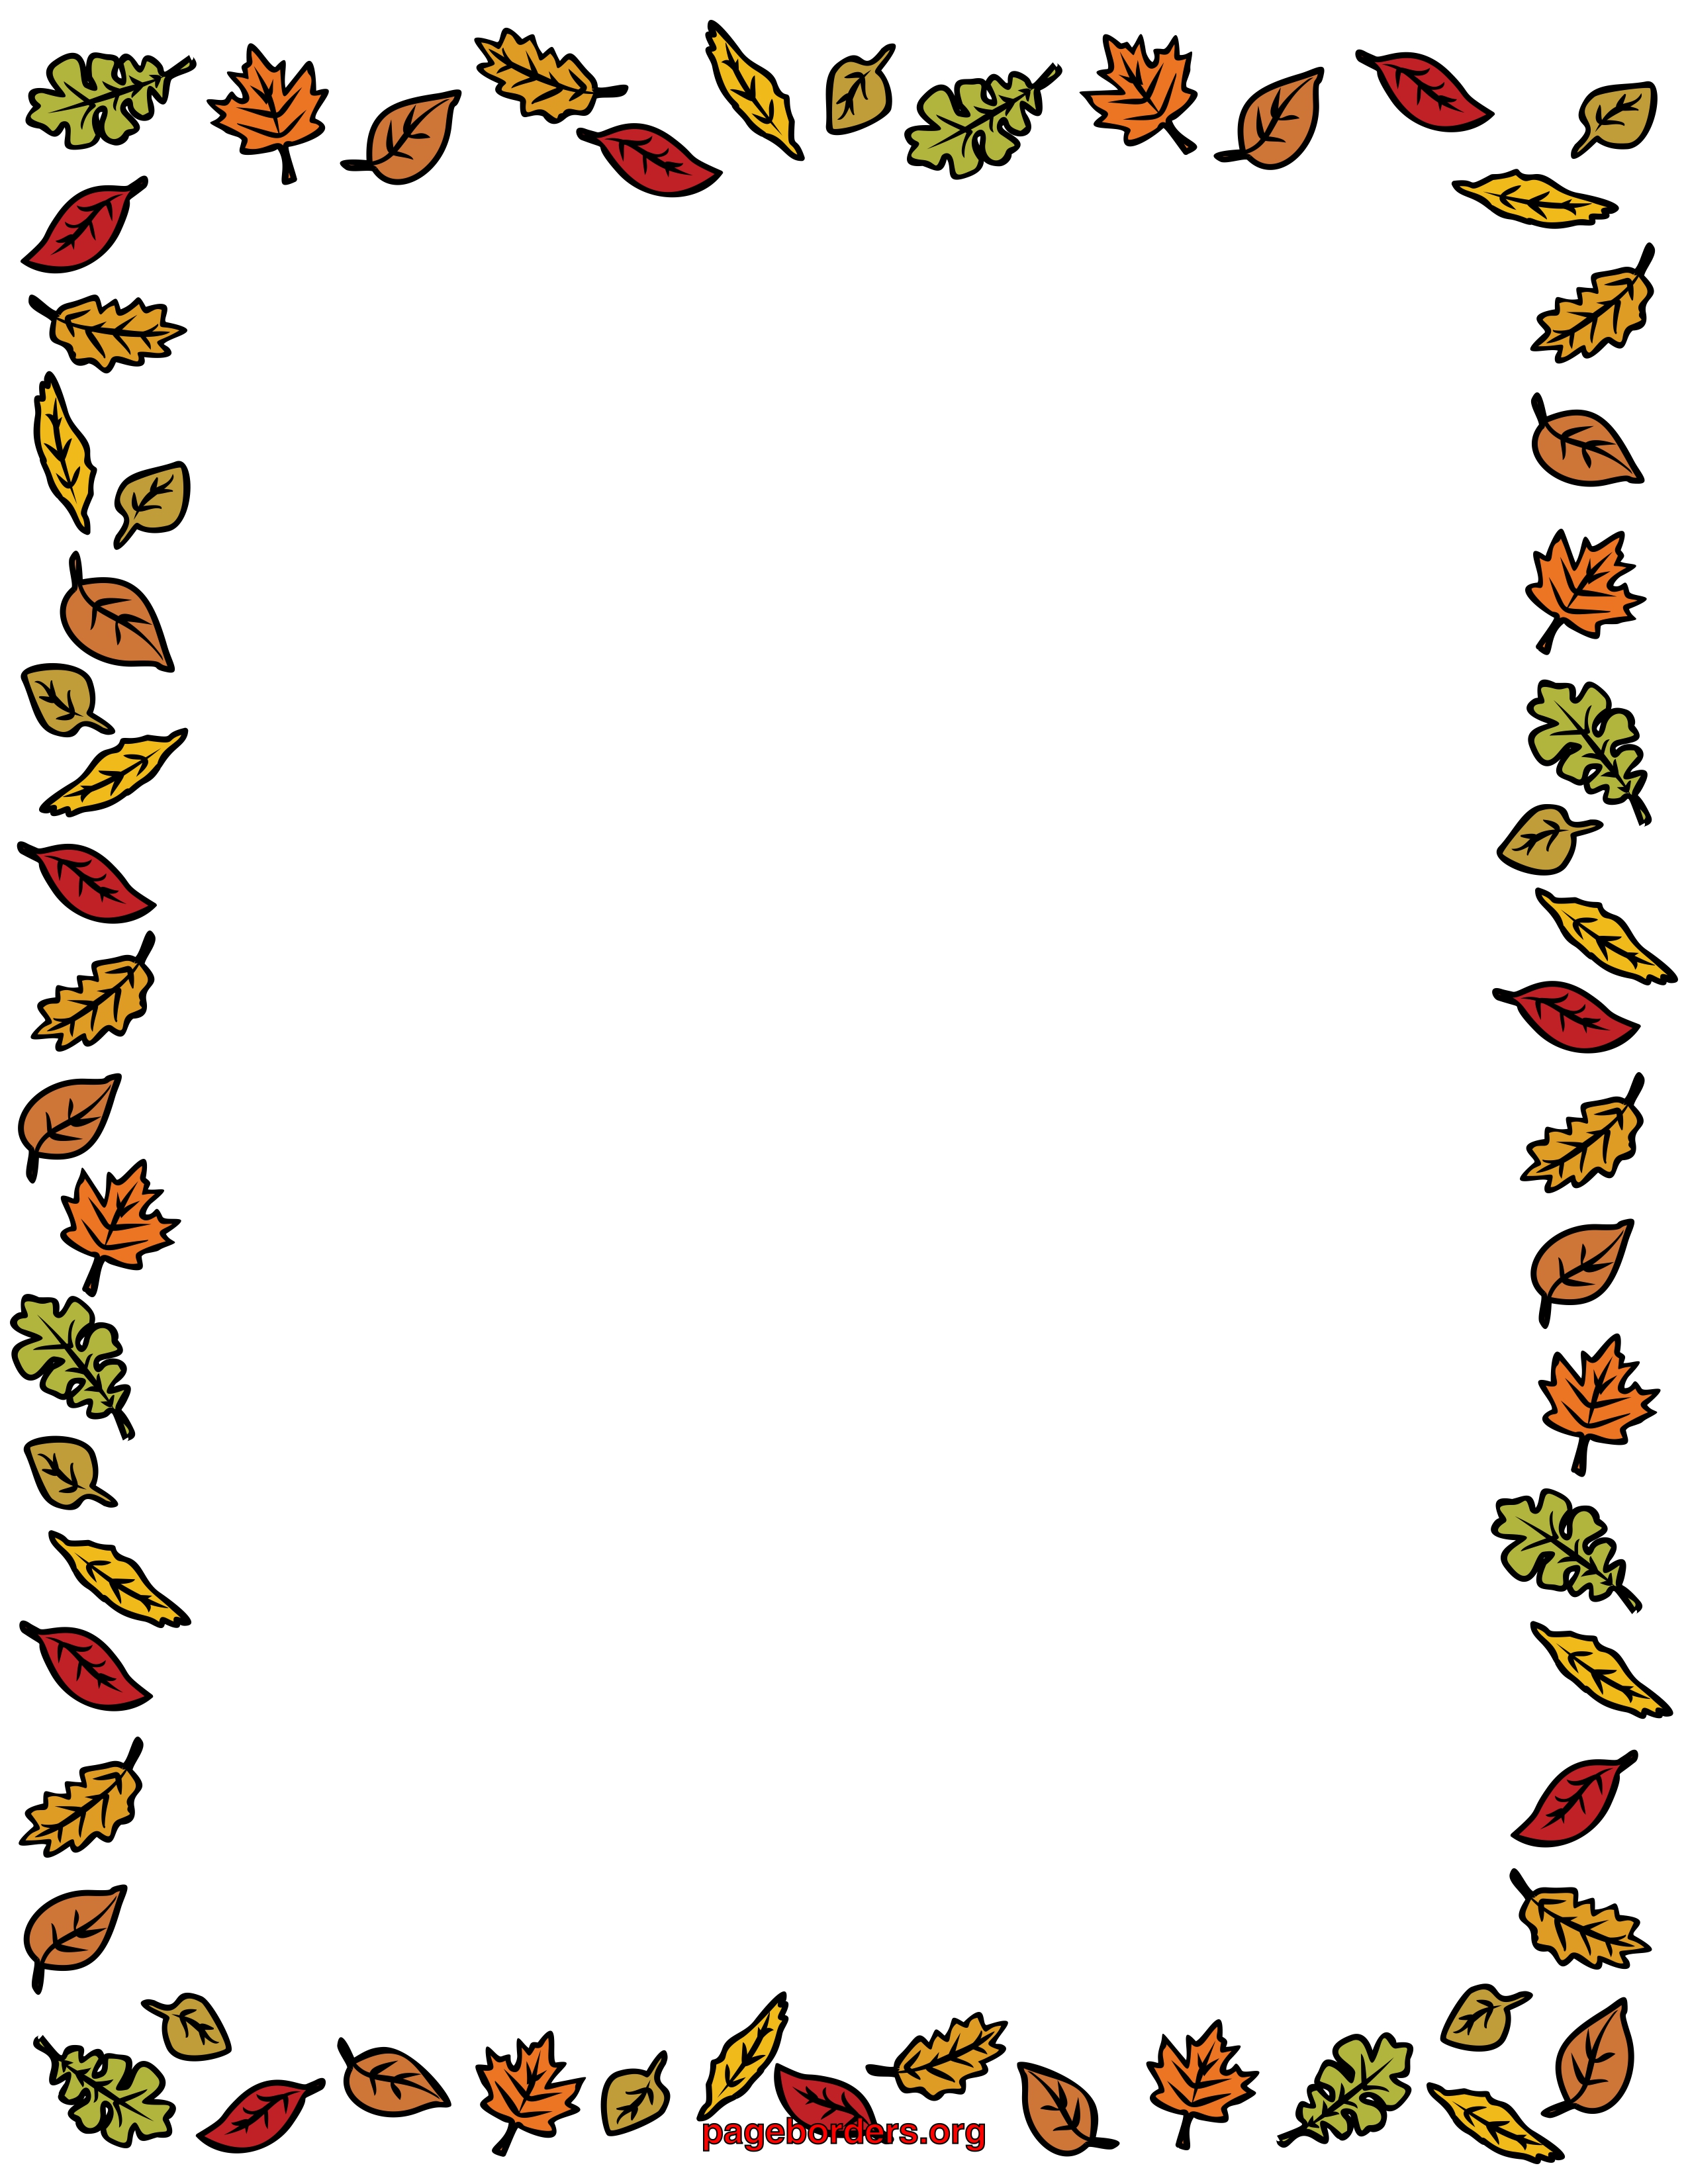 Free Coloring Pages Of Autumn - Autumn Border Clip Art